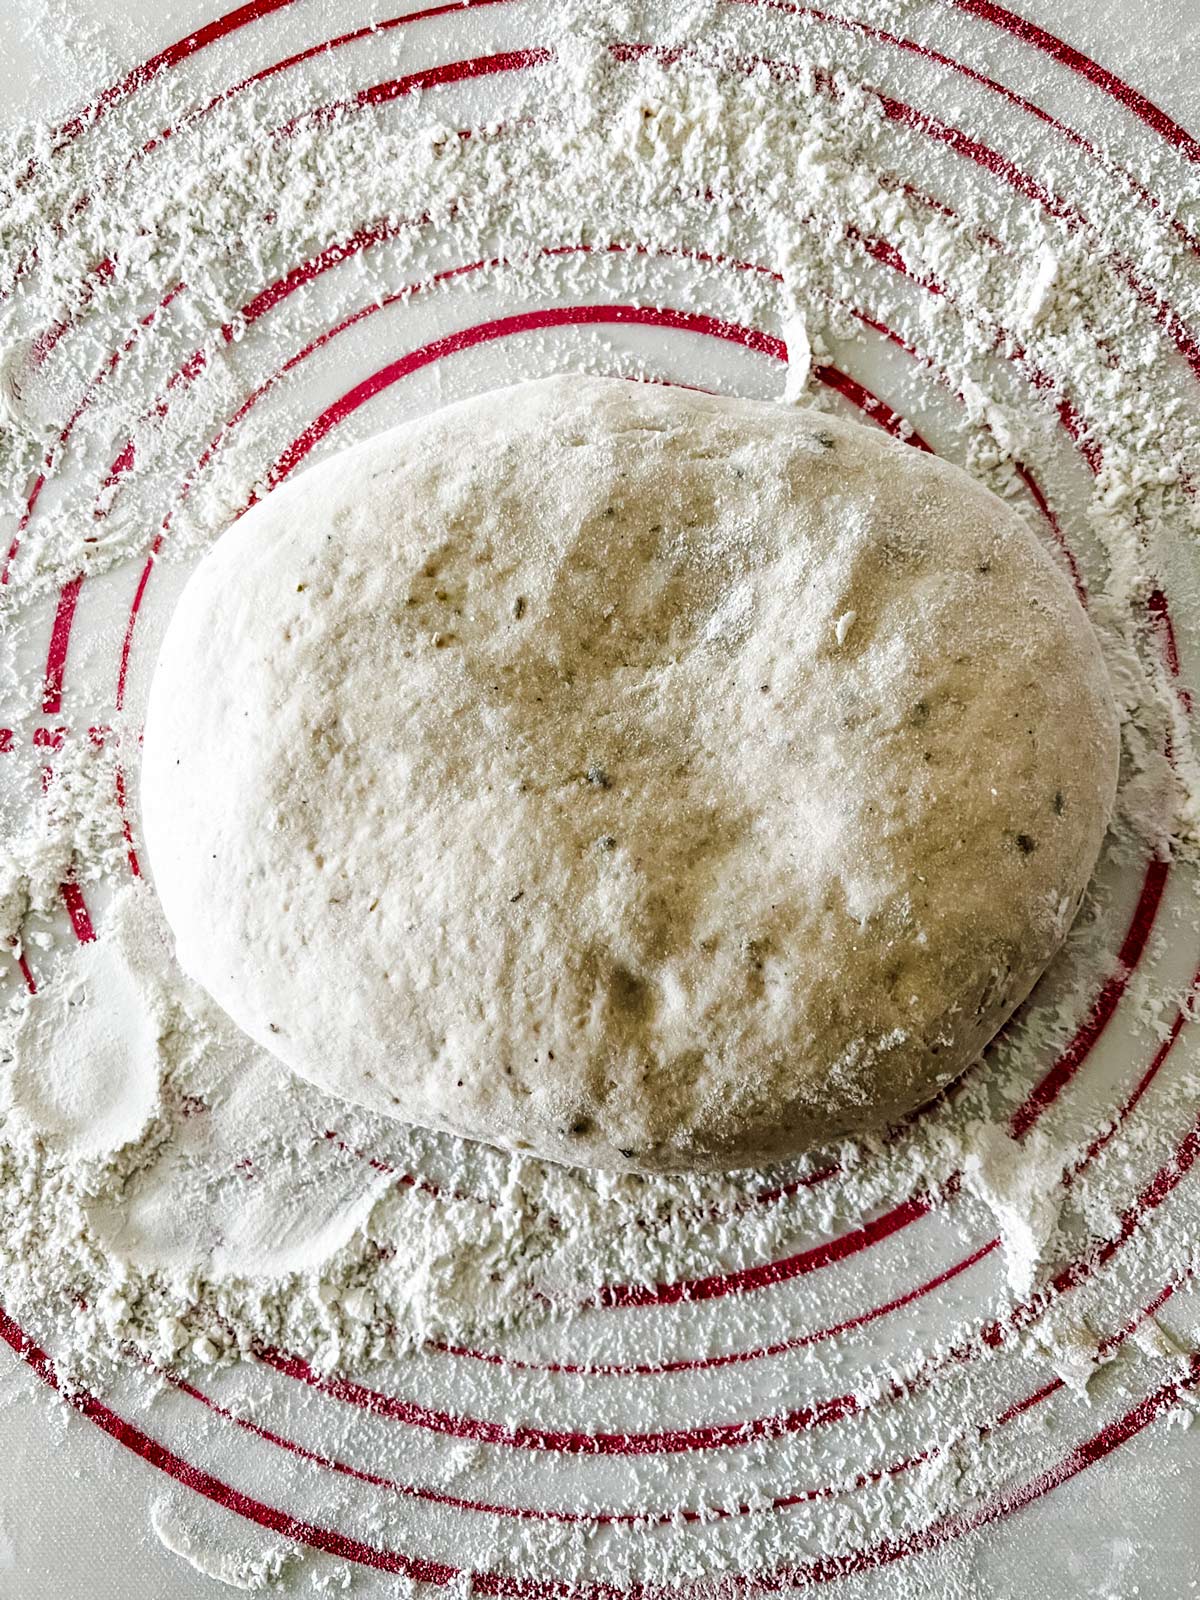 Bread dough on a flour dusted pastry mat.